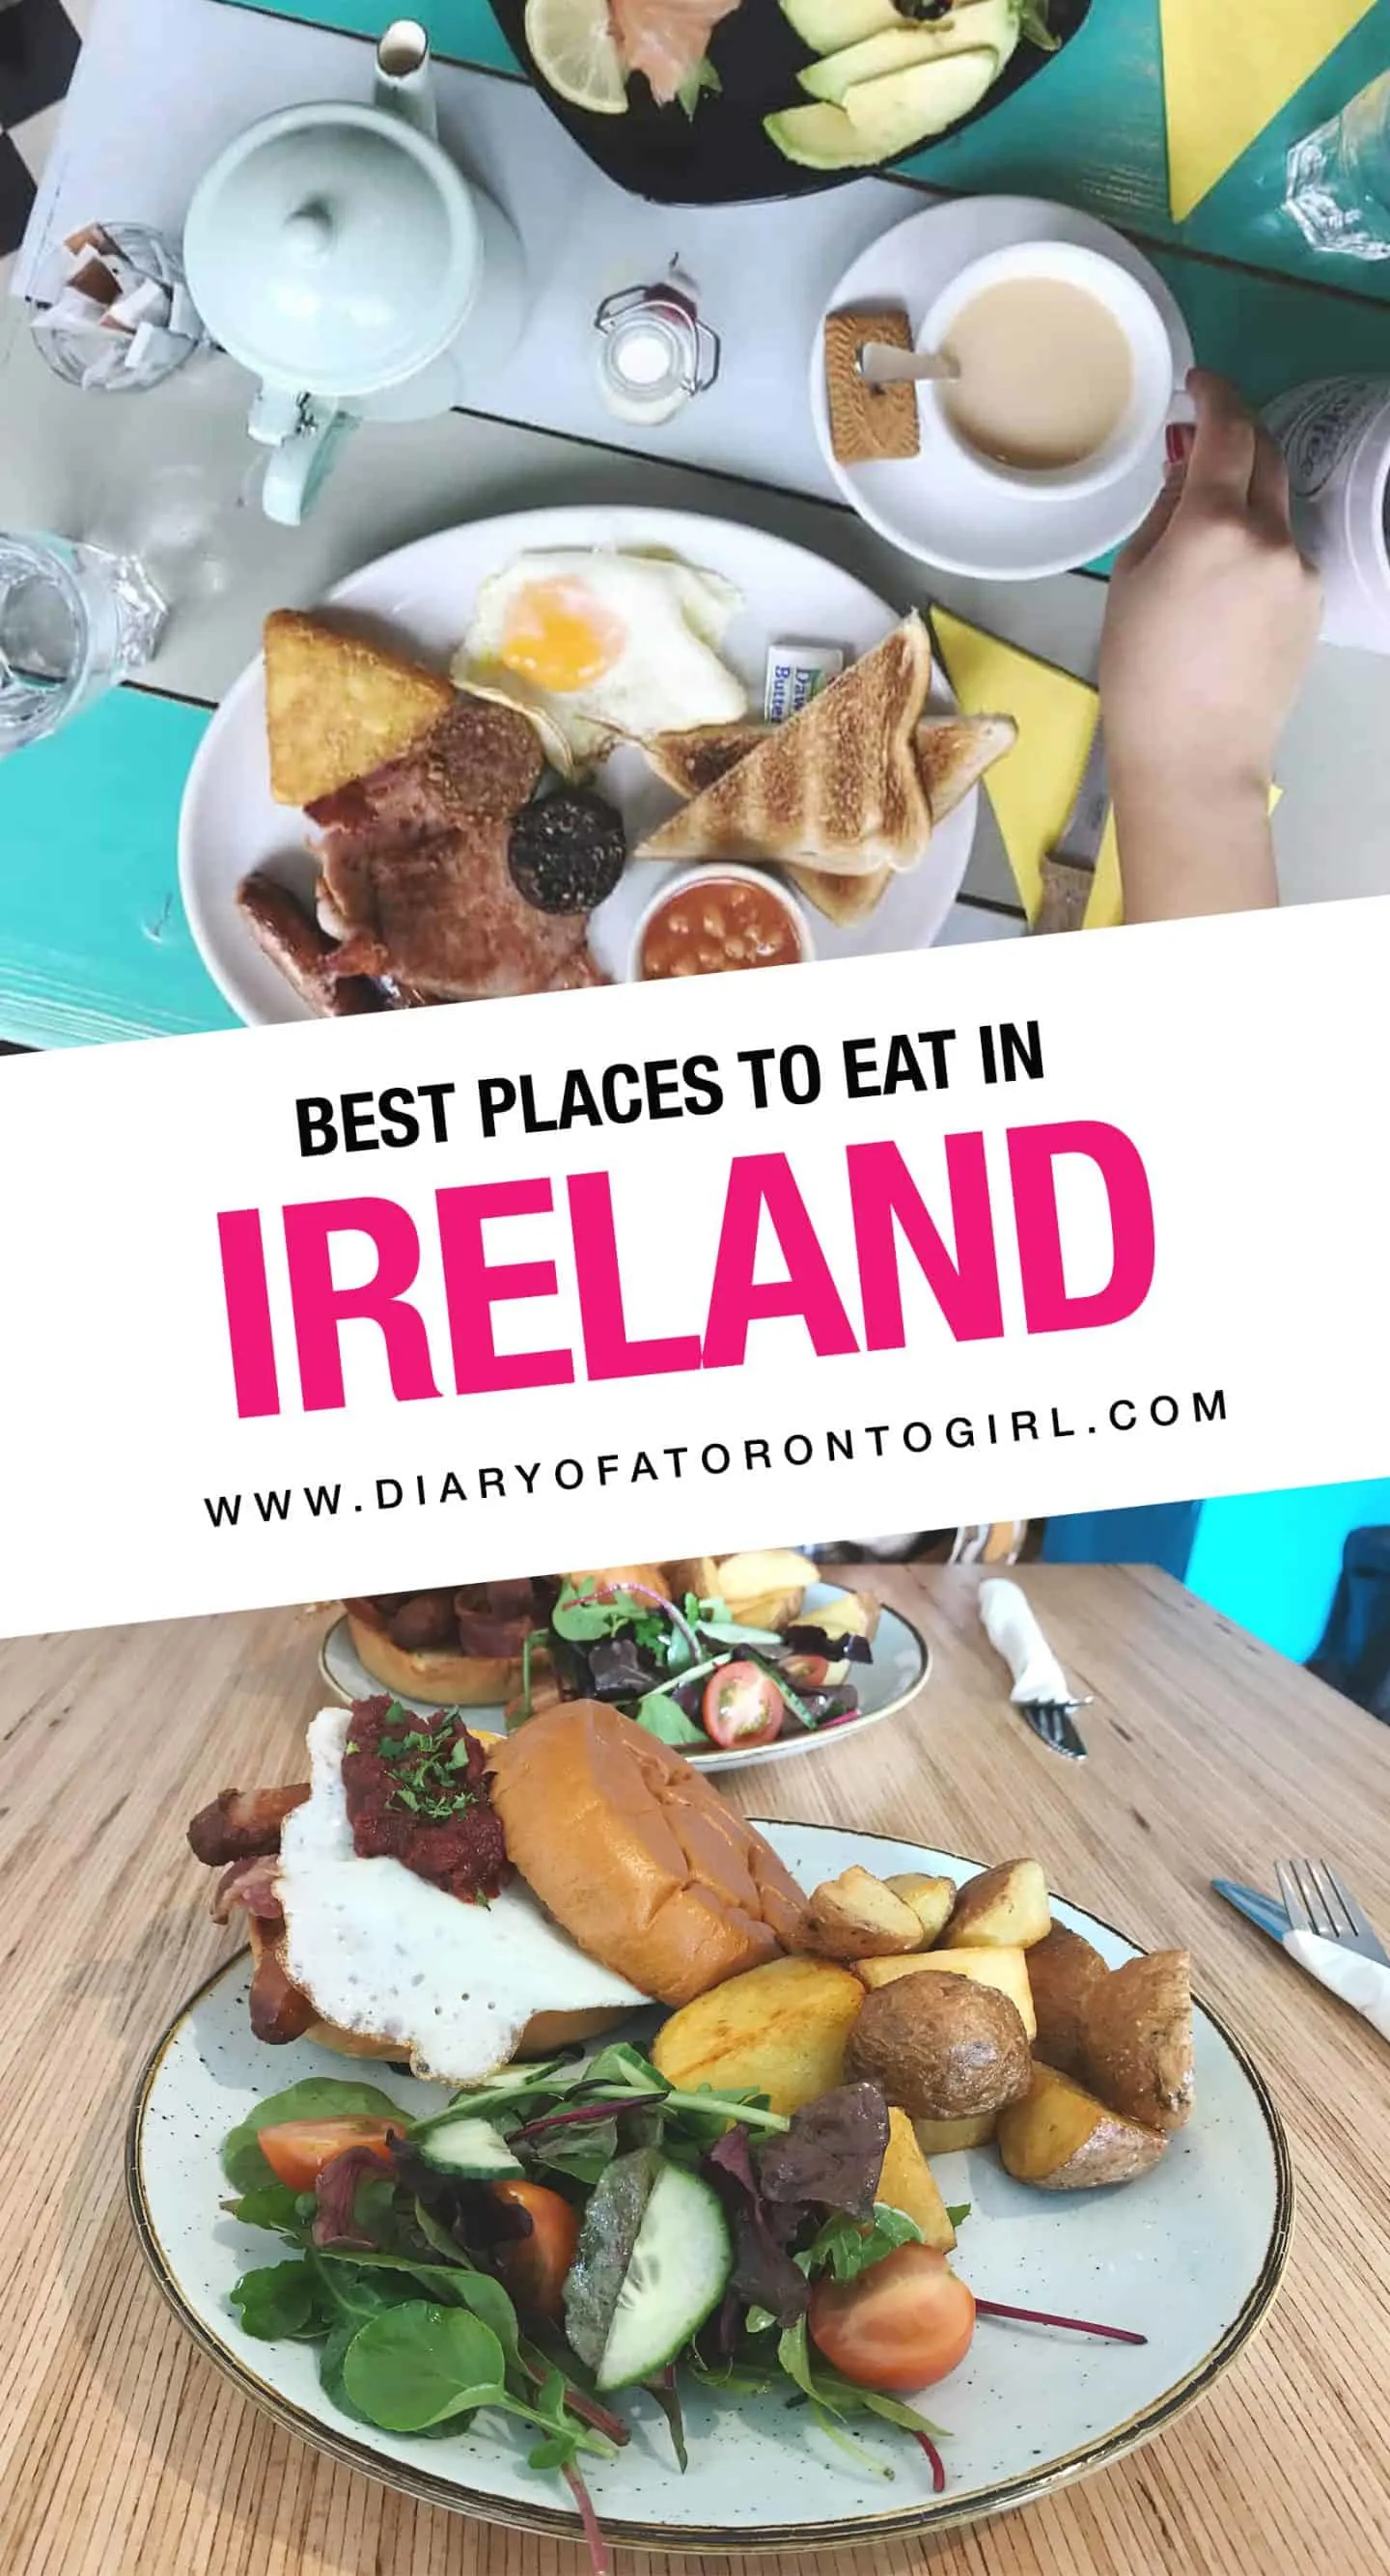 Looking for delicious food spots and places to eat in Ireland? Here are the best Ireland restaurants to visit during your trip!